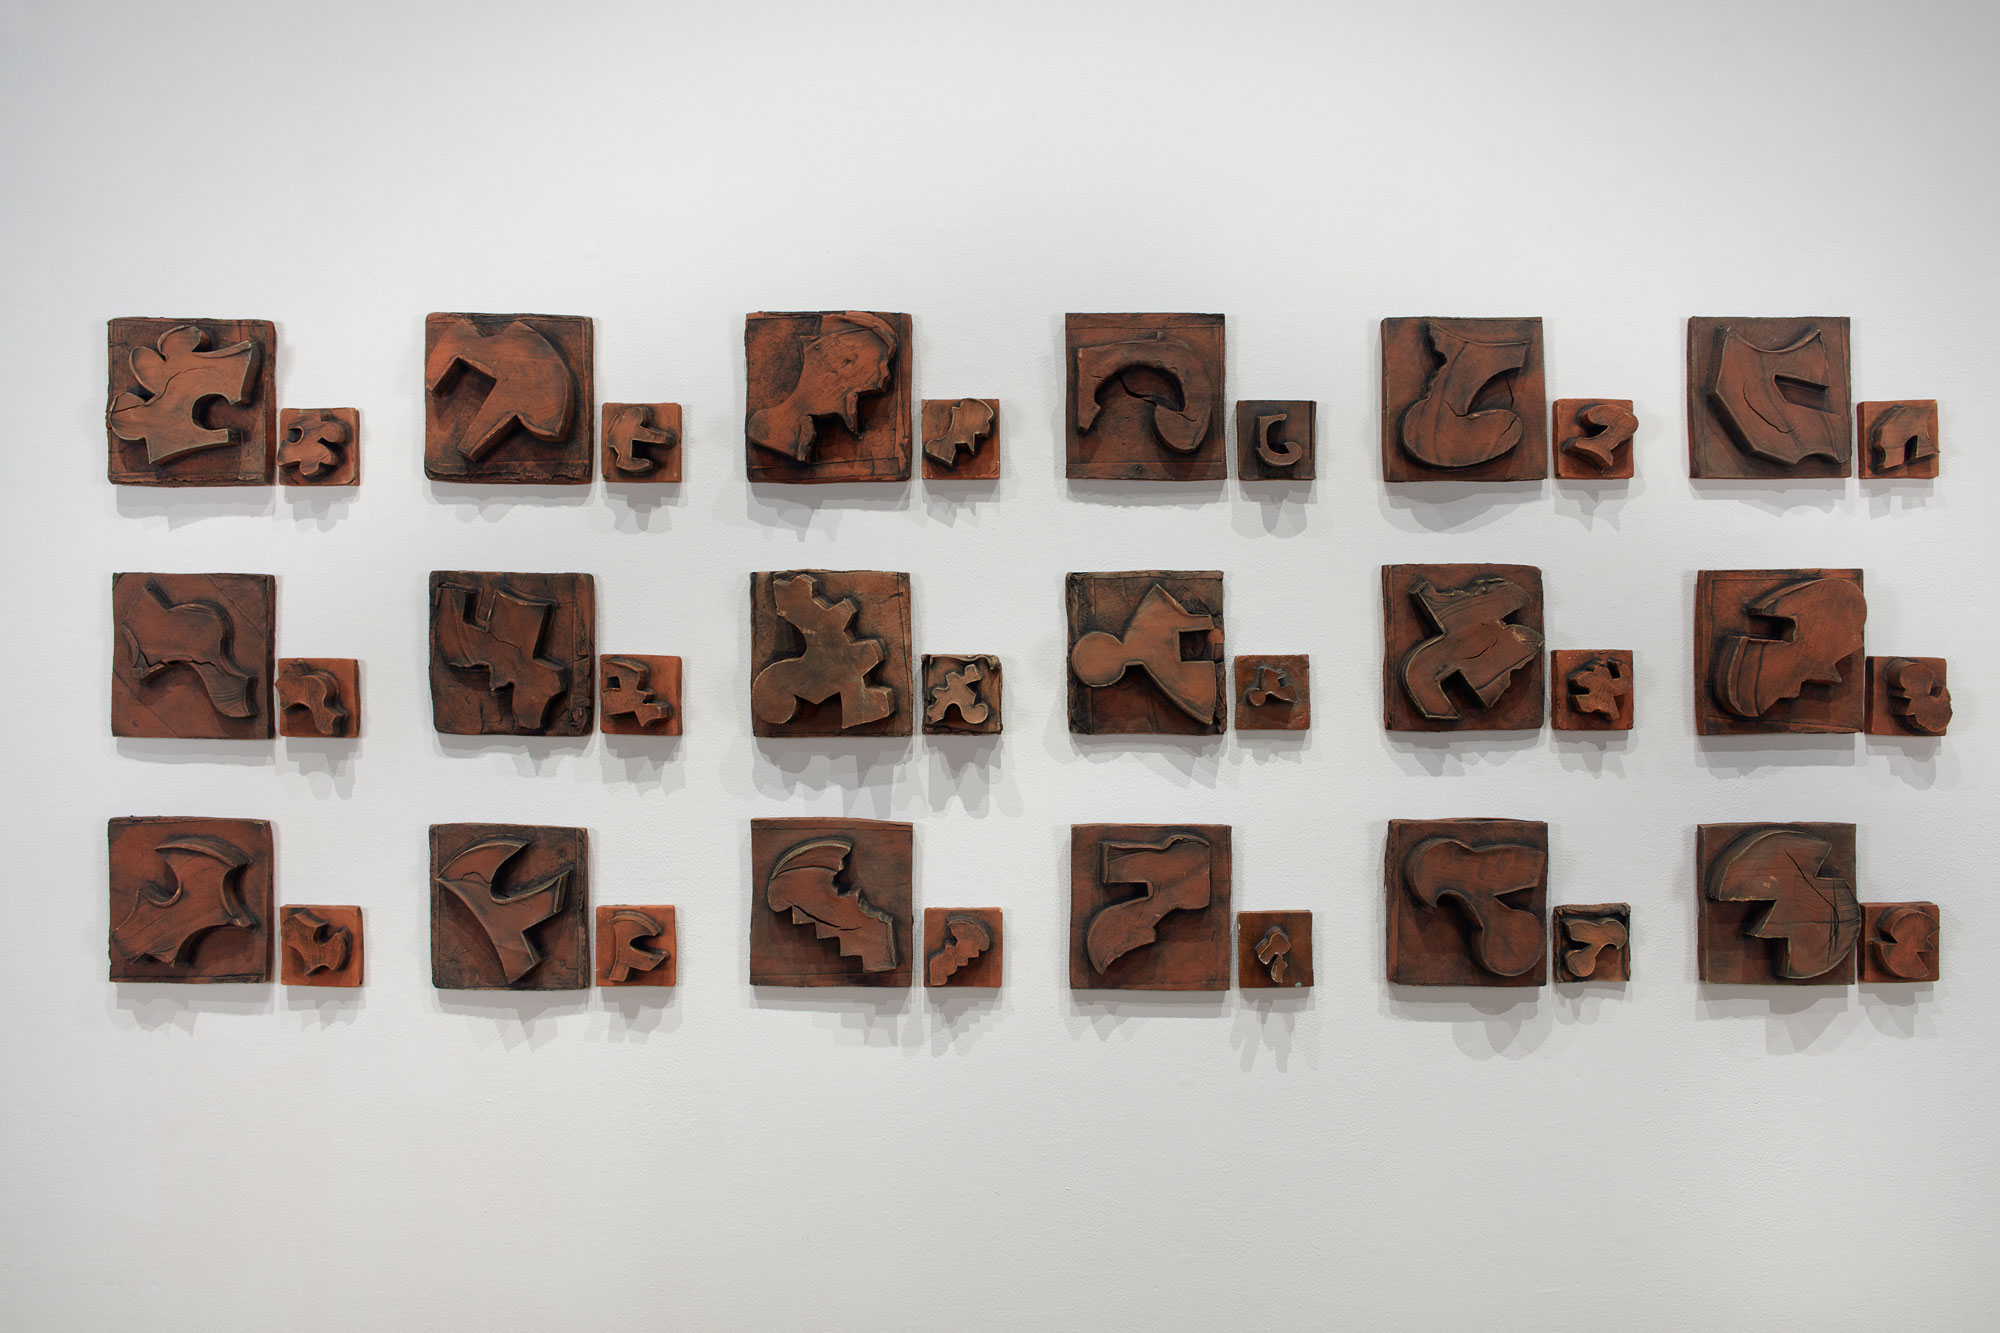 Kodi Thompson, Alphabet, 2018. ceramic and underglaze. 36 x 90 x 4 in. Courtesy of the artist. Installation view of Skyway 20/21 exhibition at USF Contemporary Art Museum. Photo: Will Lytch.